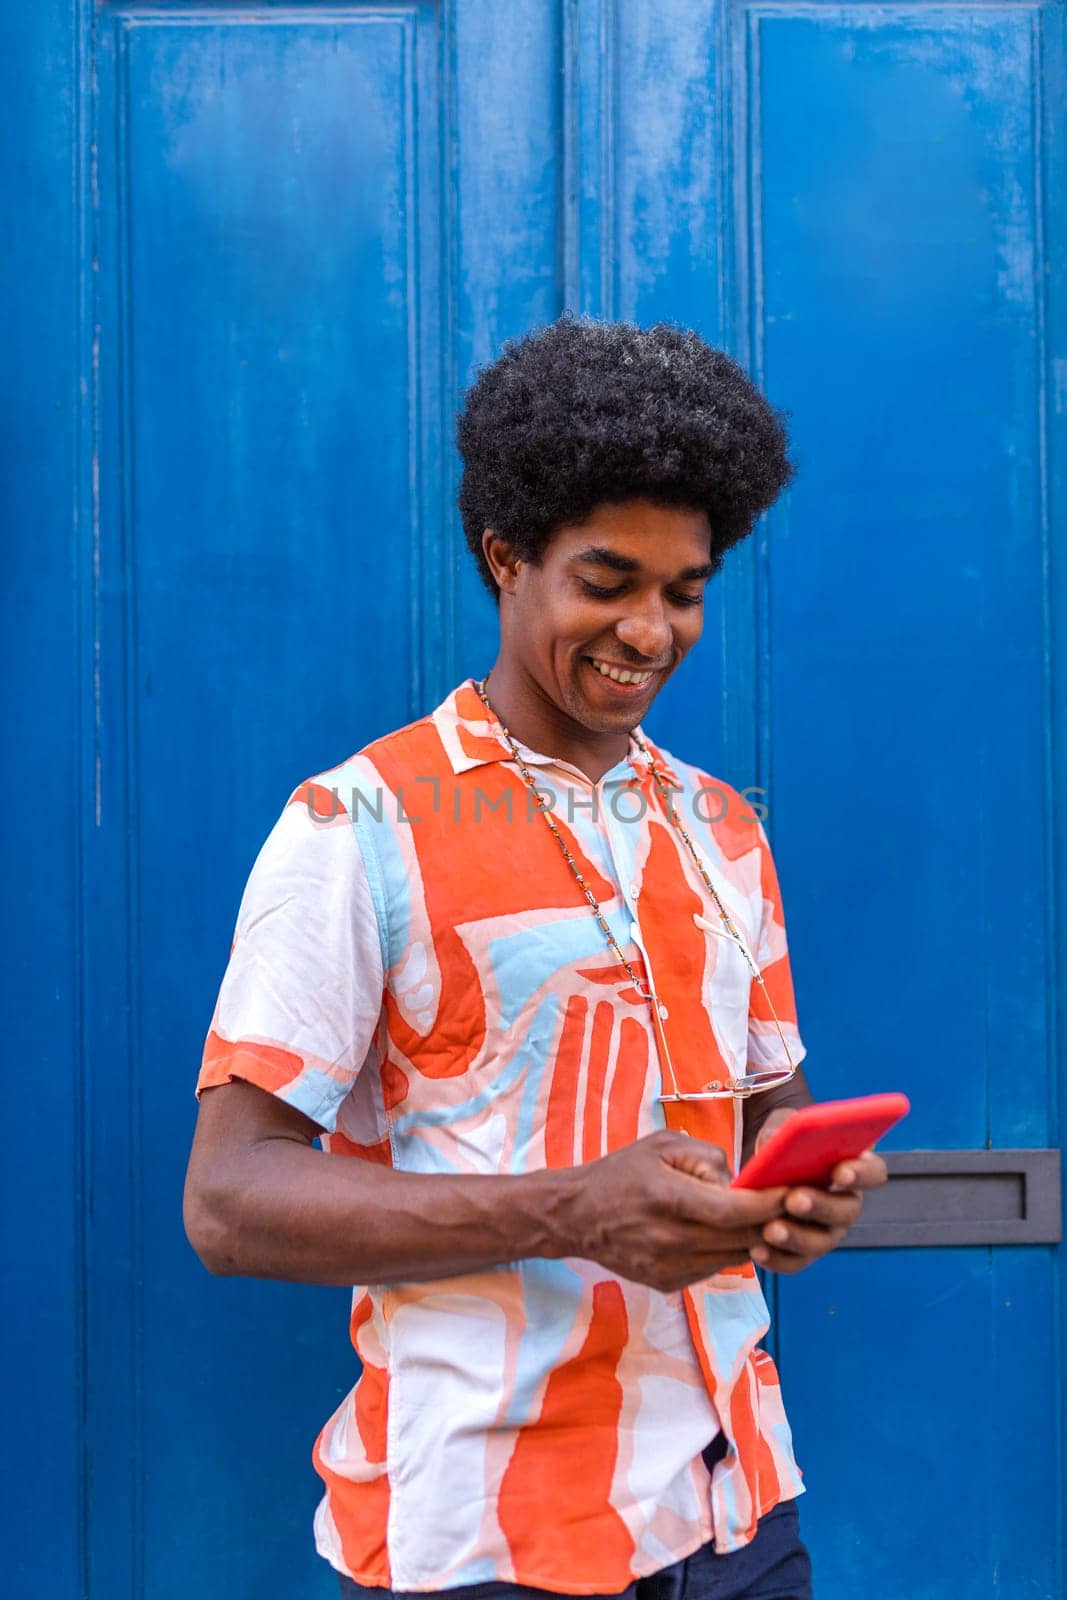 African American man using mobile phone to text a friend standing in the street. Blue door background. Vertical image. Colourful image.